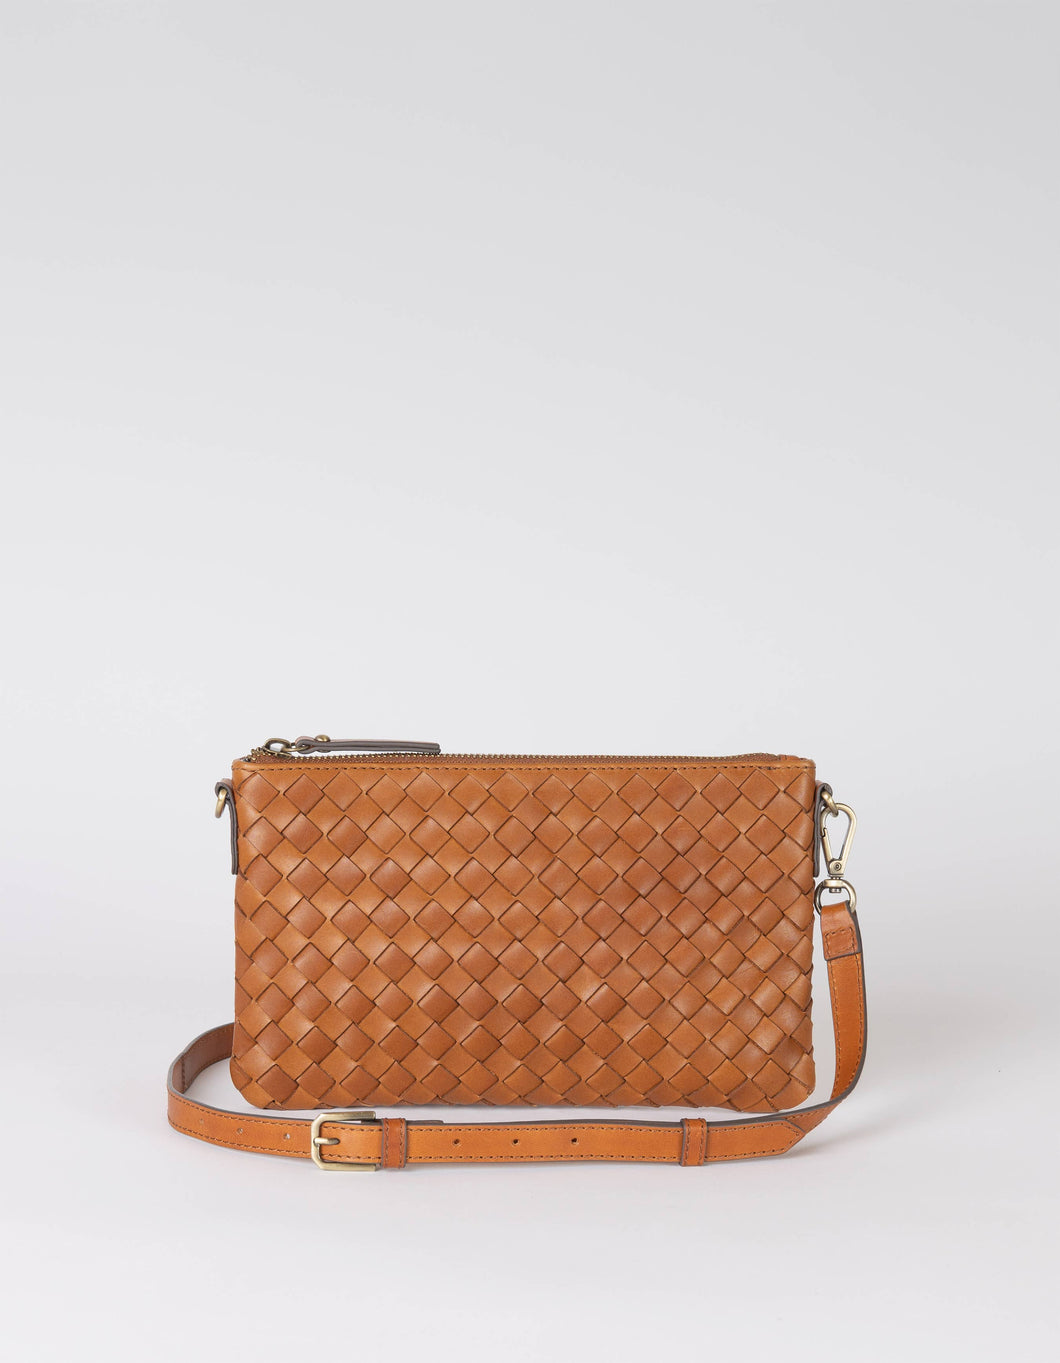 O My Bag - Lexi - Cognac Woven Classic Leather